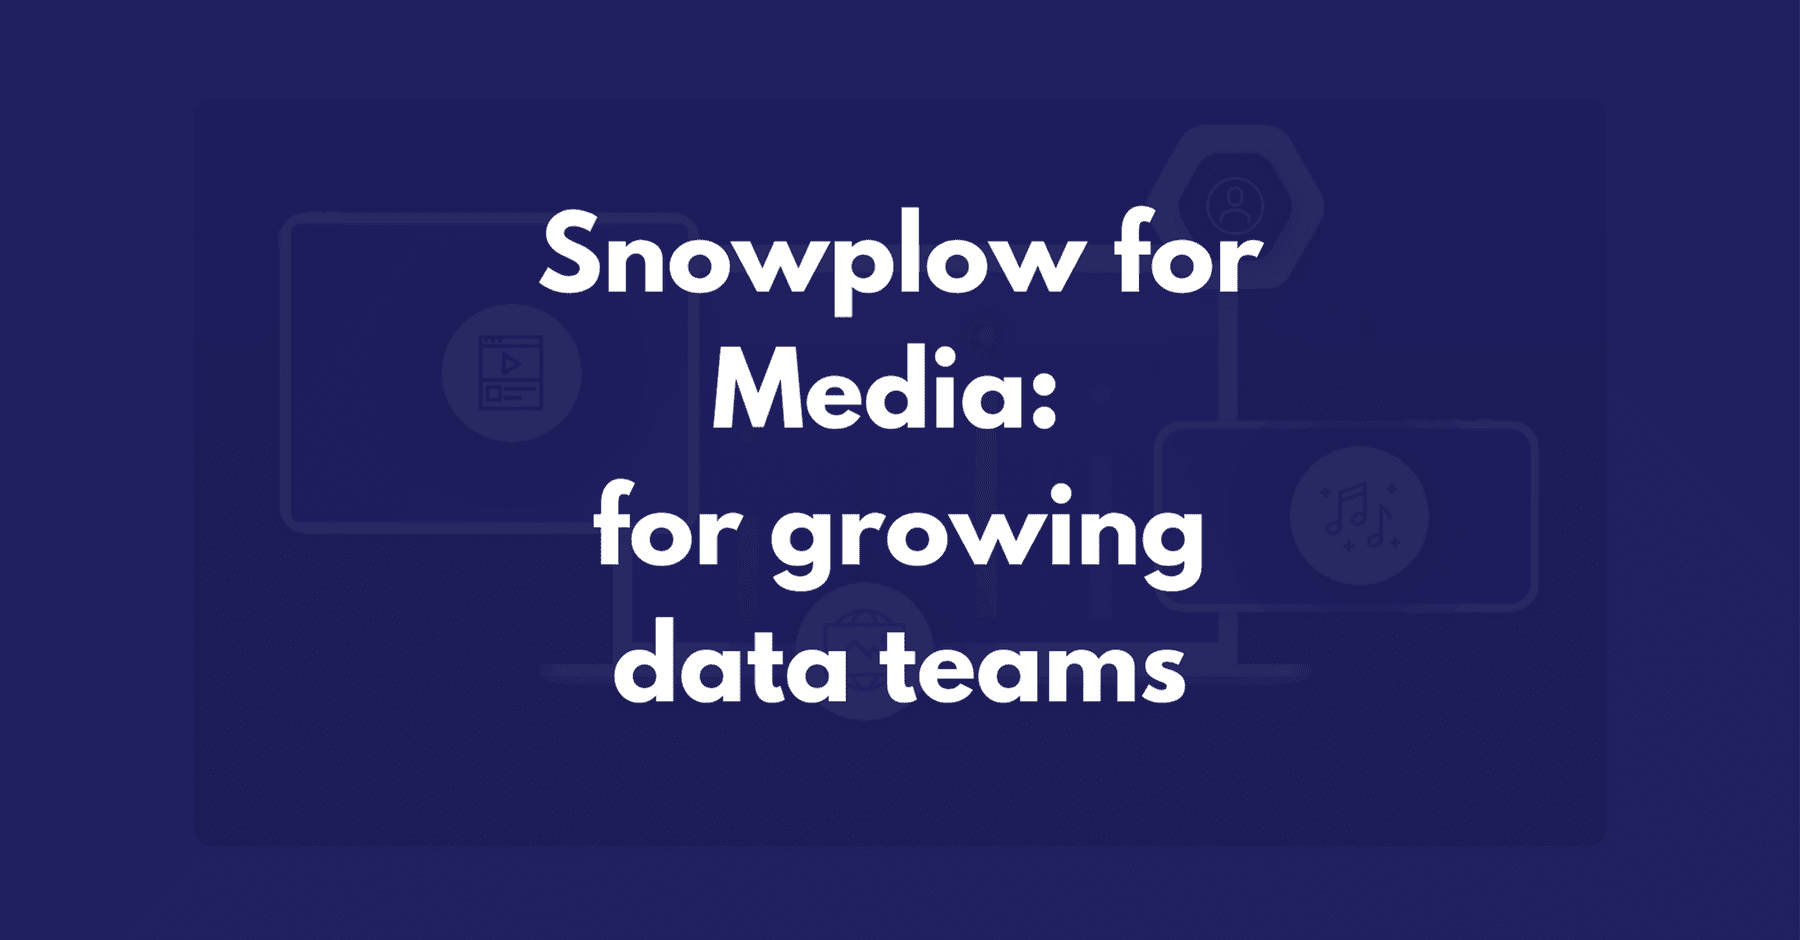 Snowplow for media part 4: what can we do with the data now we're growing?